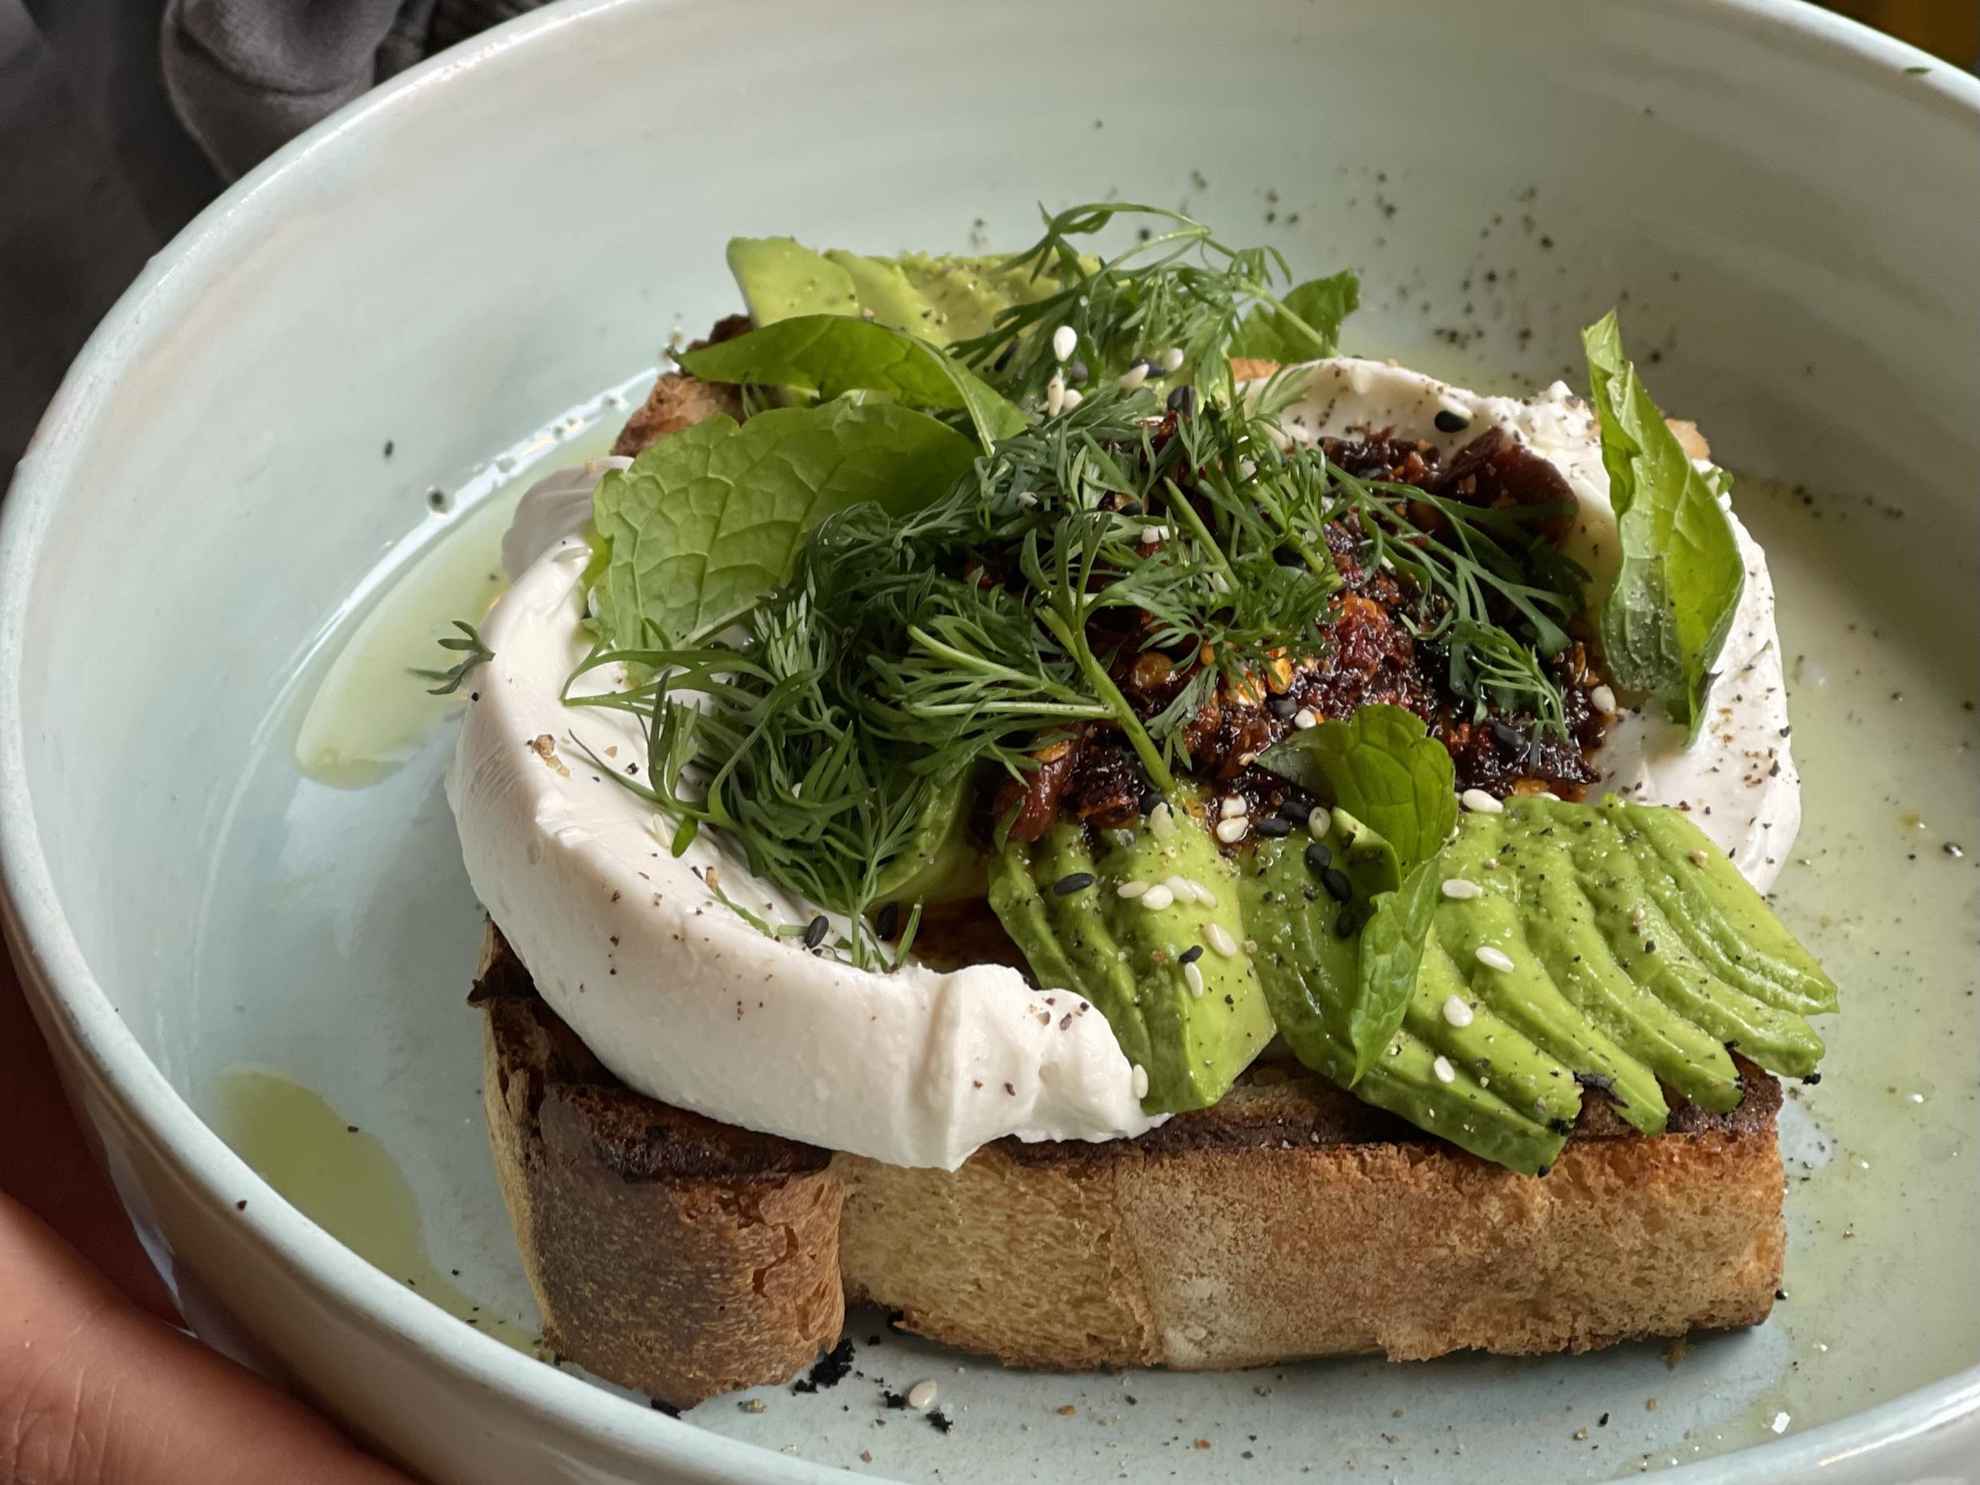 A plate with a sandwich with avocado and other ingredients.